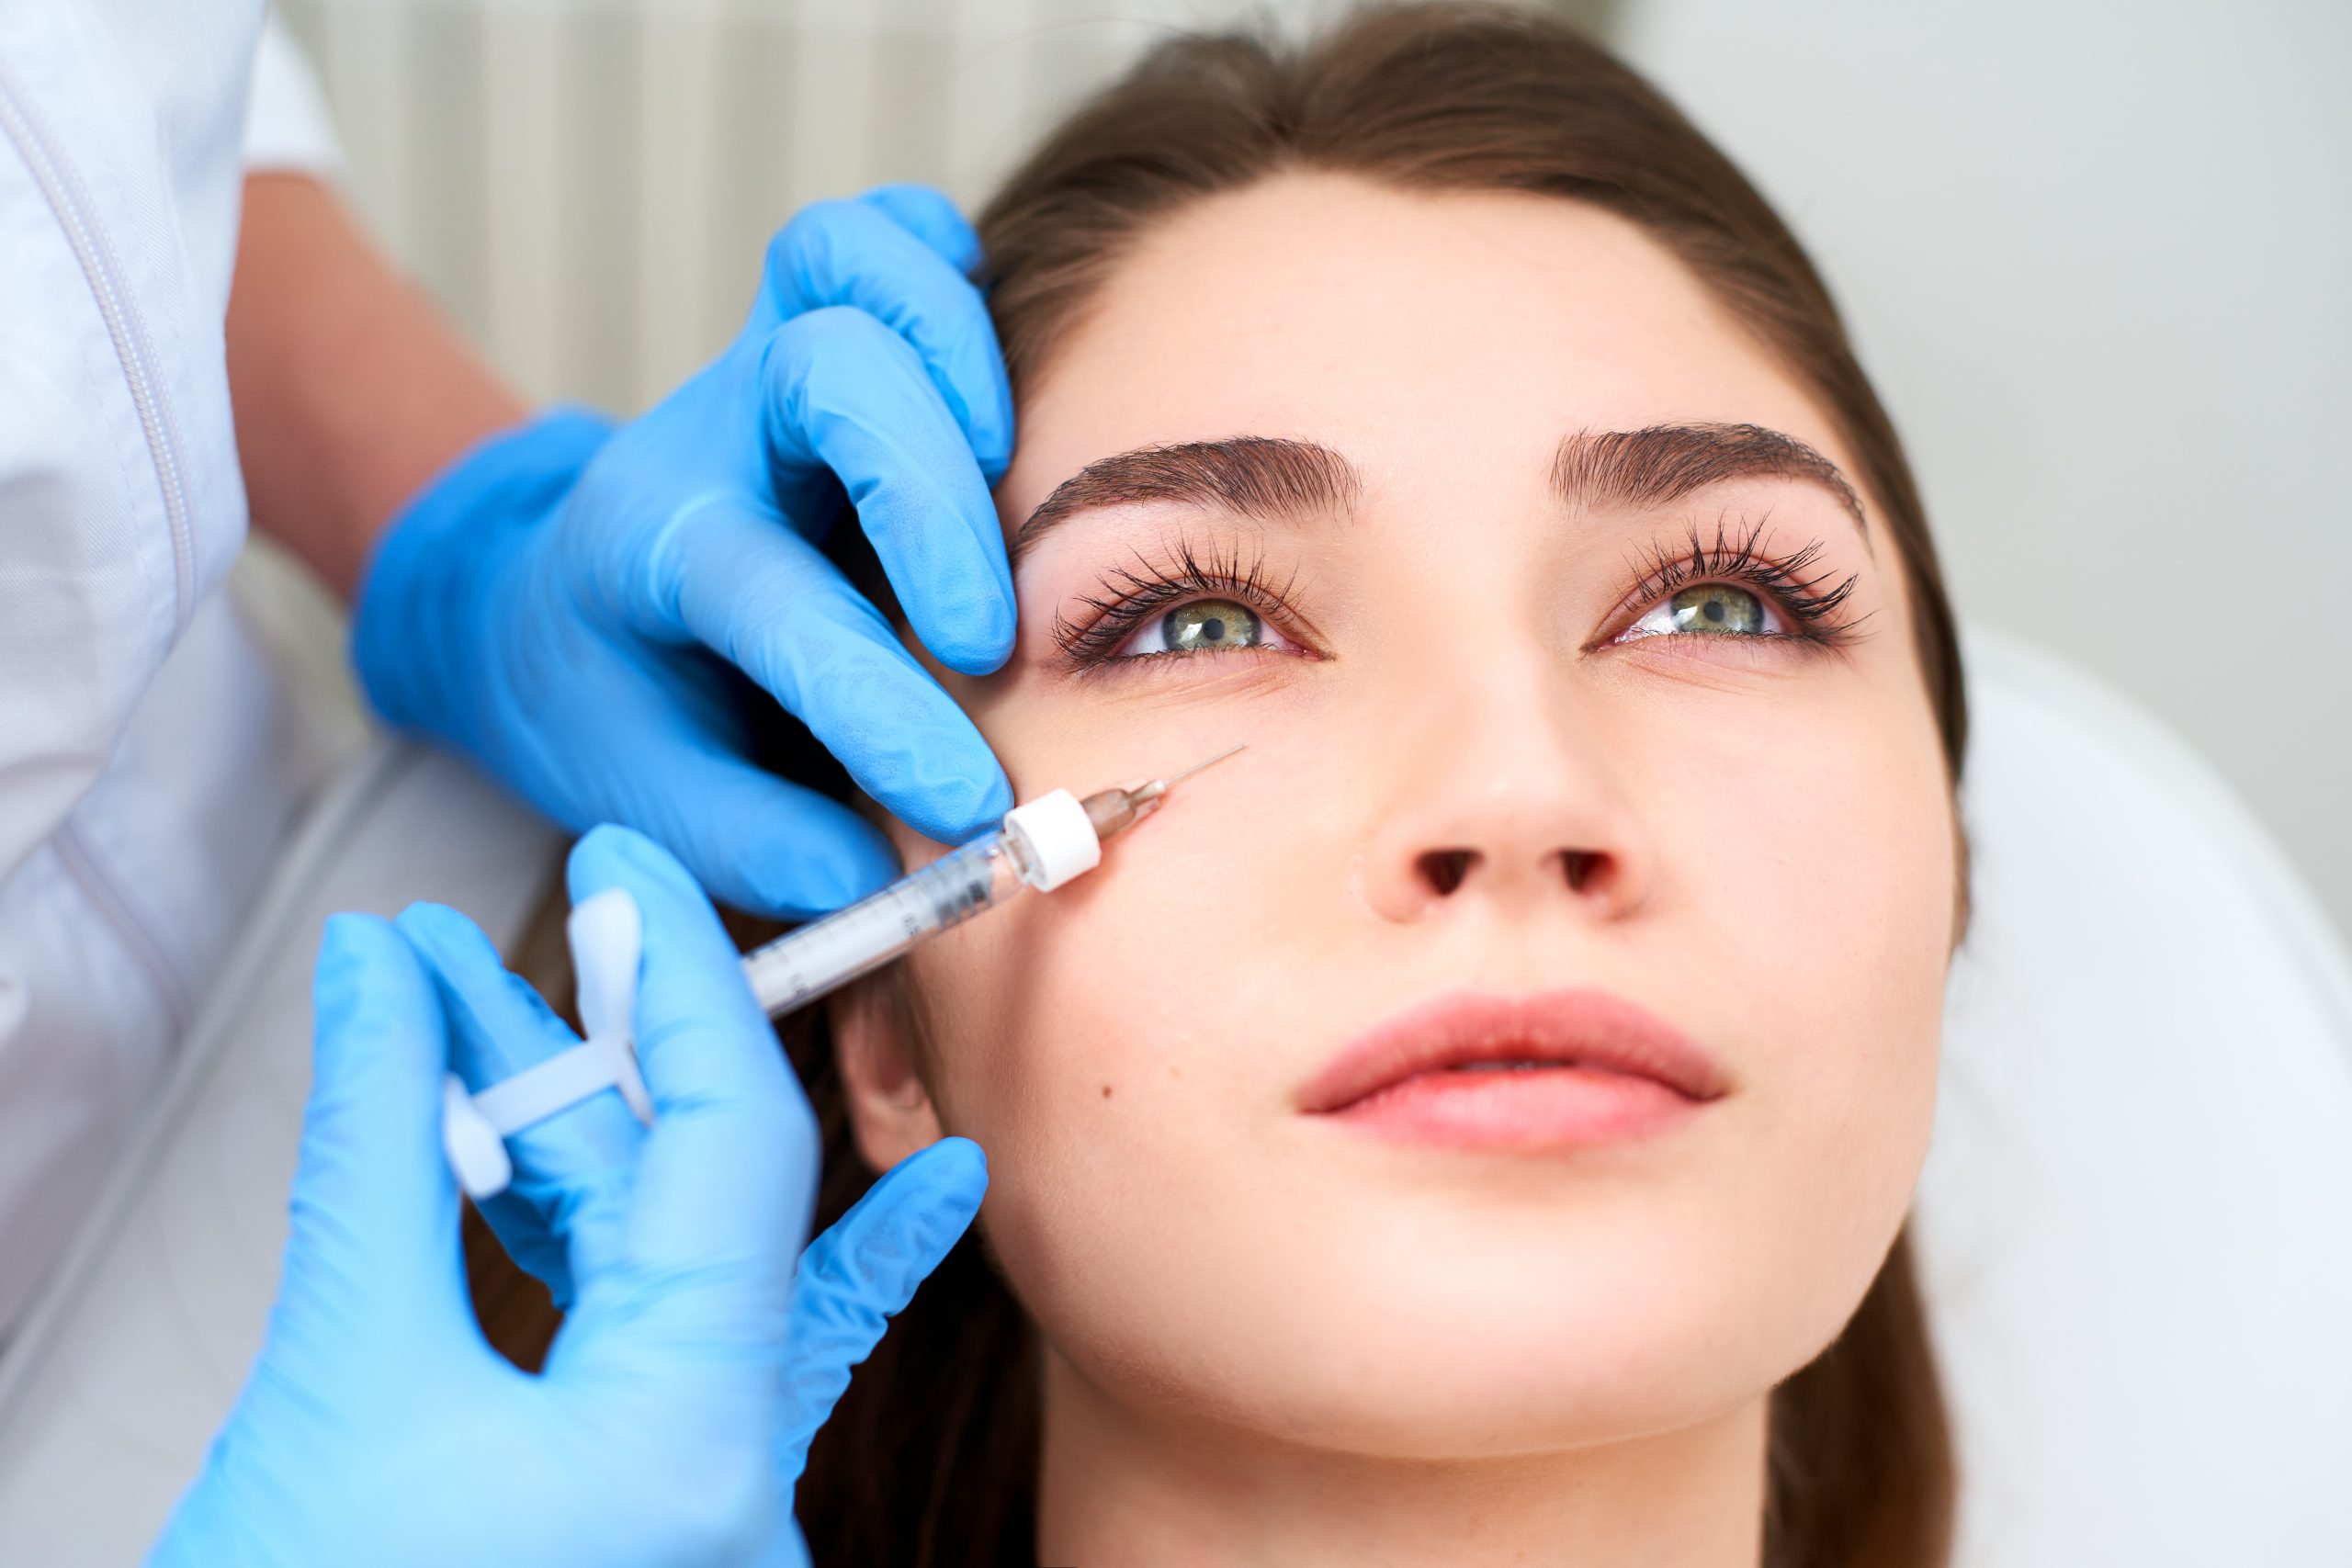 What are the side effects of a Tear Trough Filler?